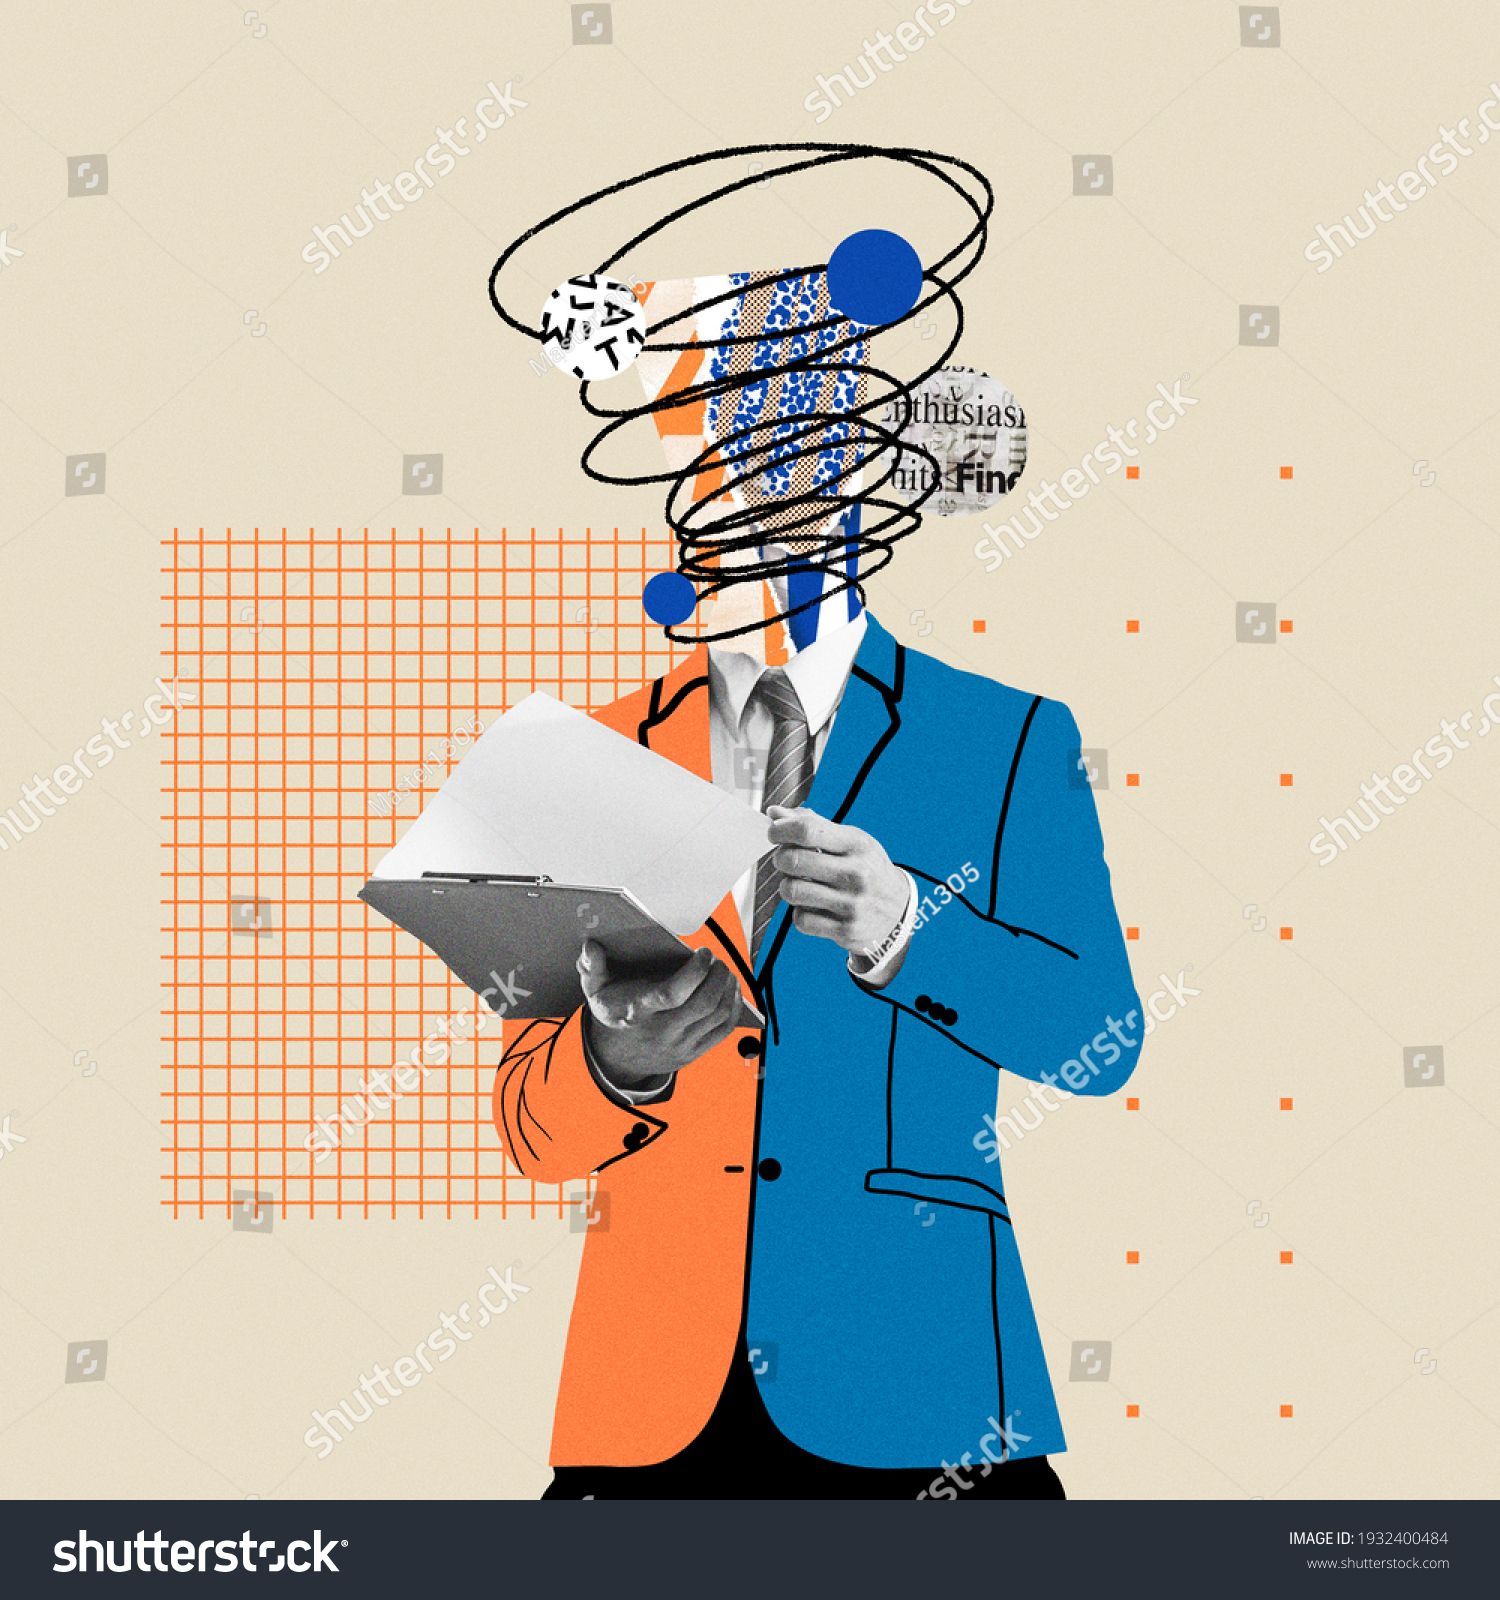 Preparing reports. Comics styled bright orange and blue suit. Modern design, contemporary art collage. Inspiration, idea concept, trendy urban magazine style. Negative space to insert your text or ad. #1932400484